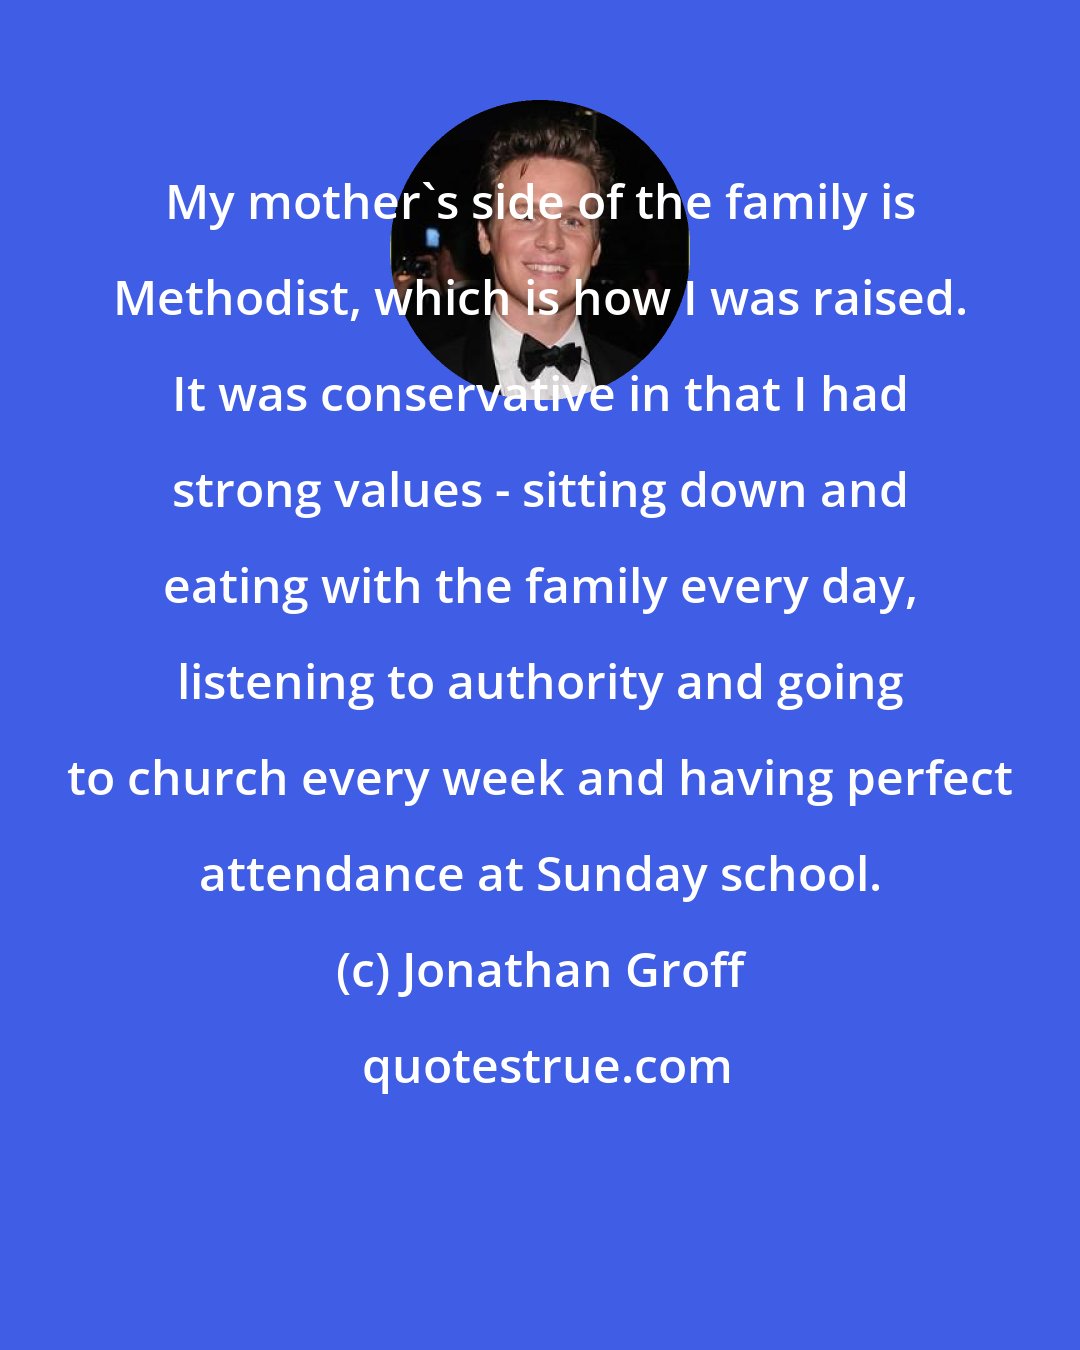 Jonathan Groff: My mother's side of the family is Methodist, which is how I was raised. It was conservative in that I had strong values - sitting down and eating with the family every day, listening to authority and going to church every week and having perfect attendance at Sunday school.